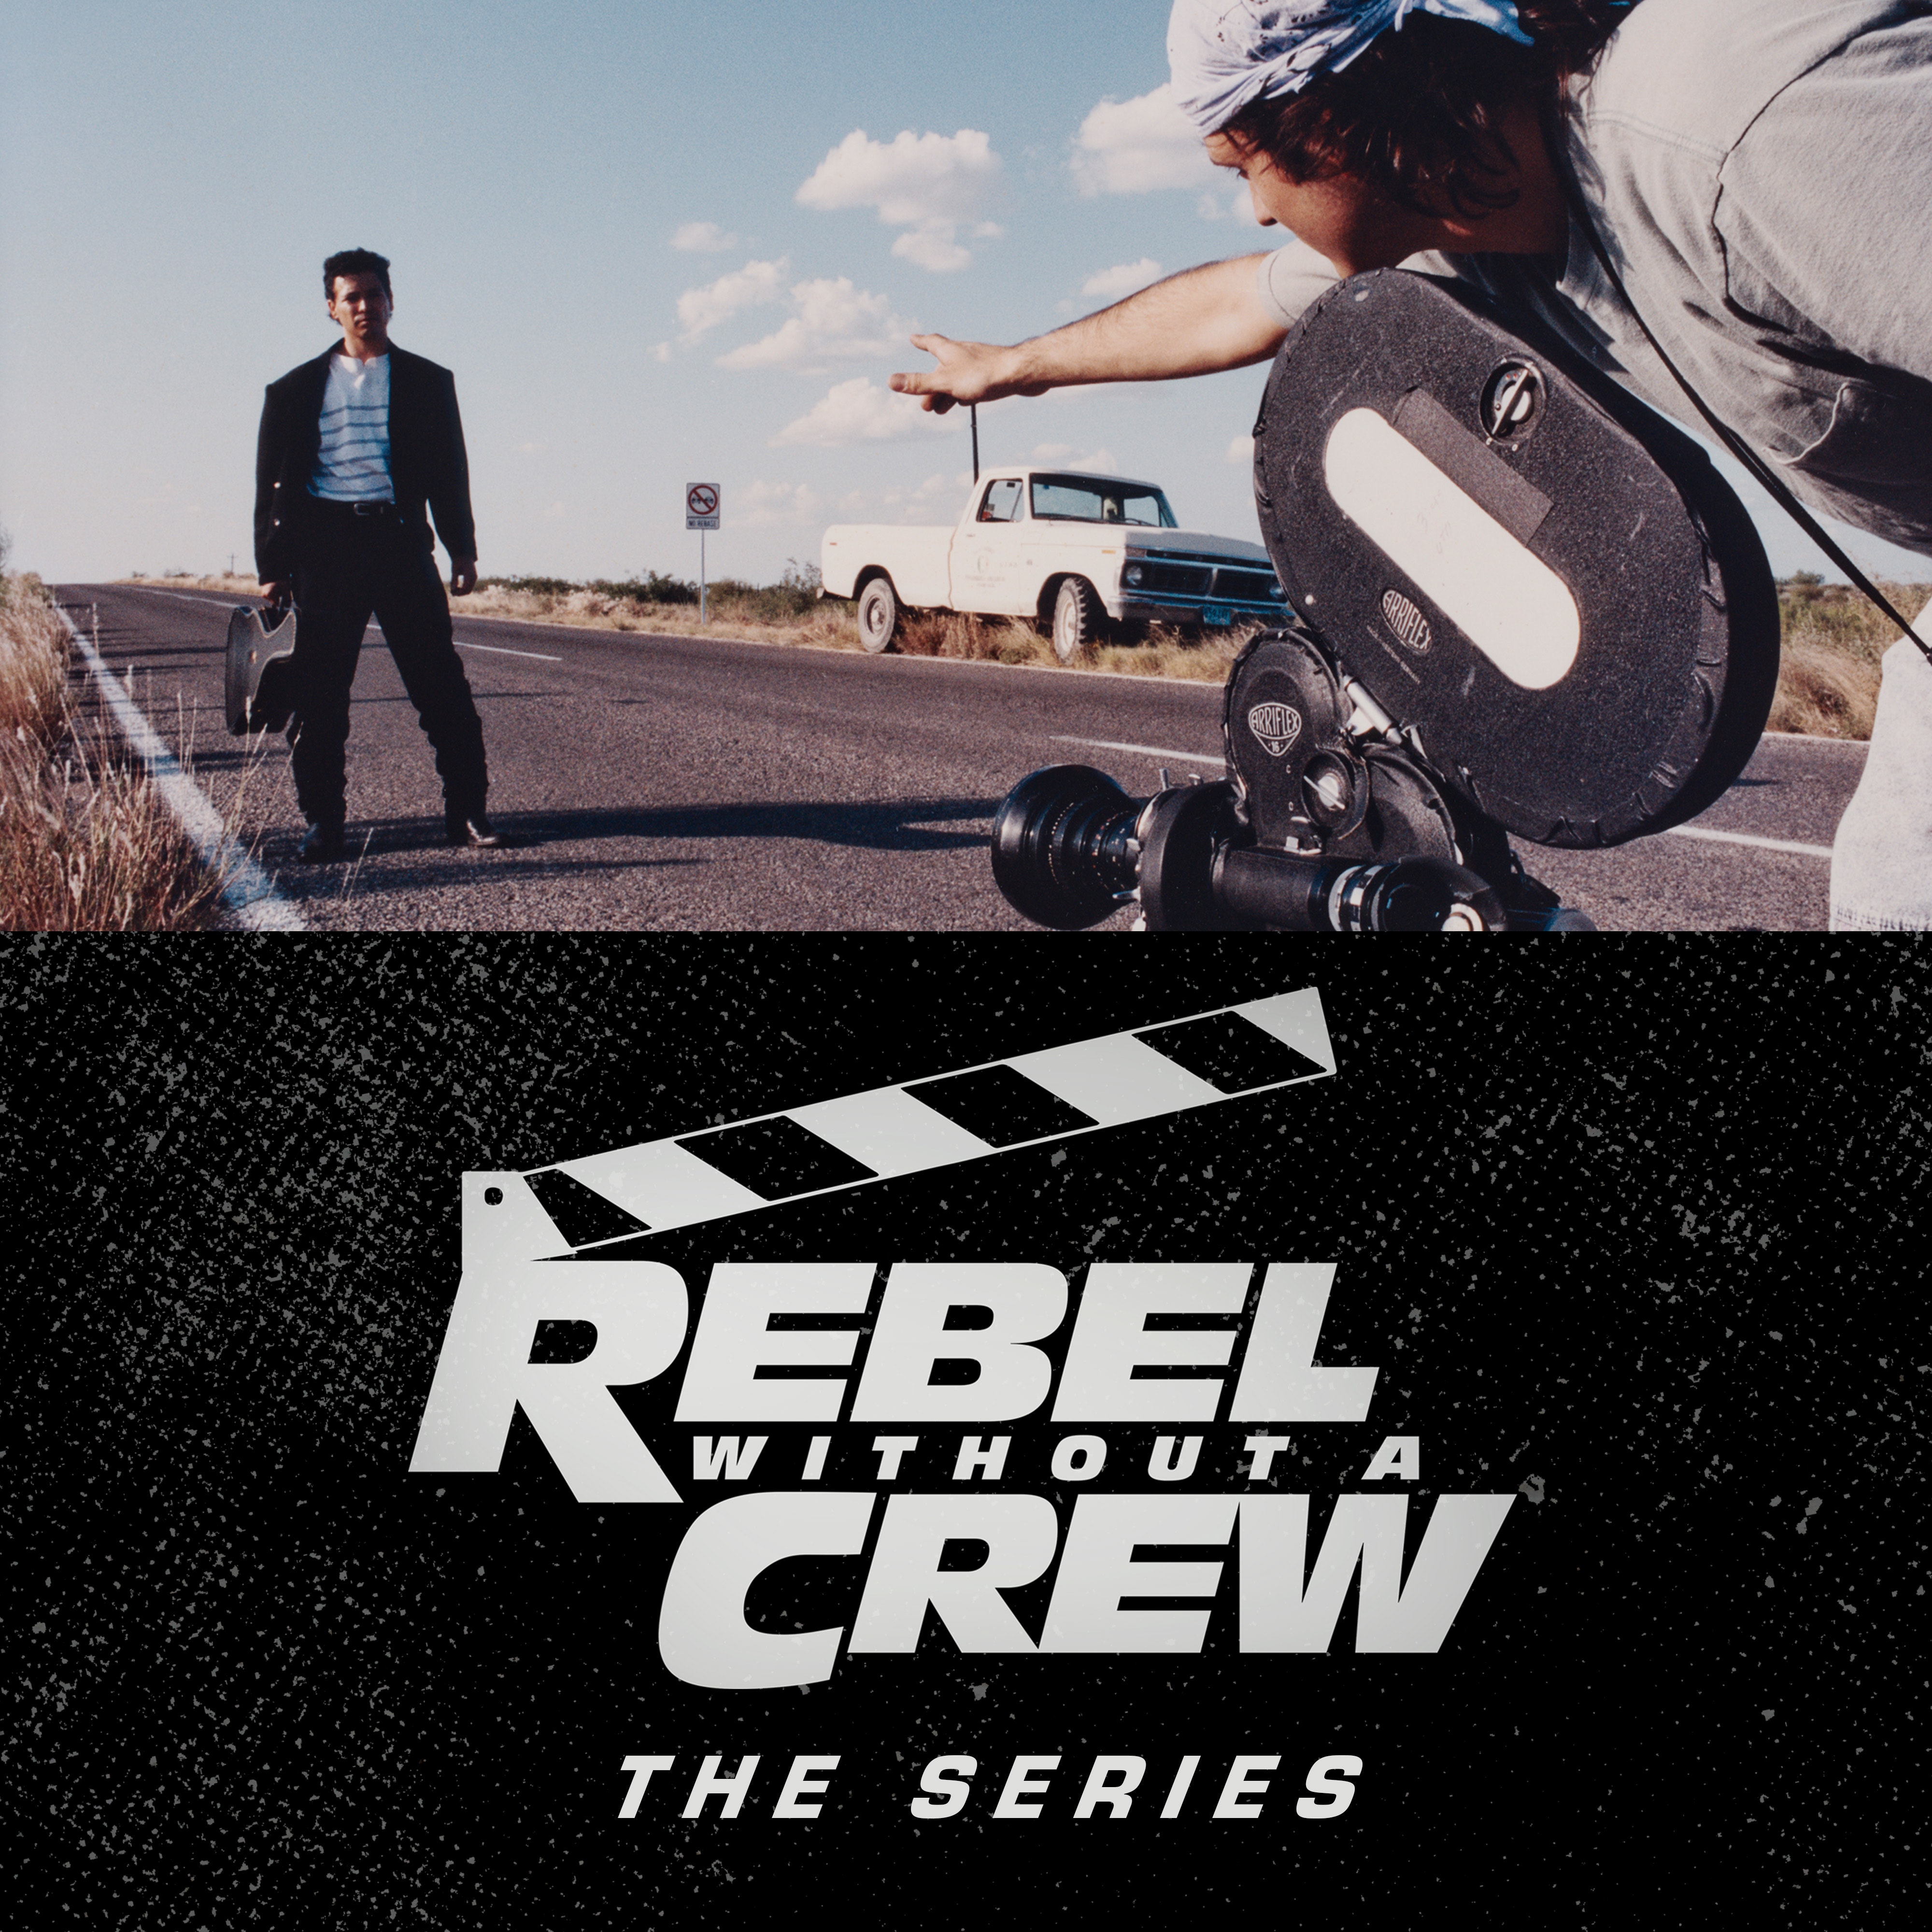 Rebel Without a Crew official